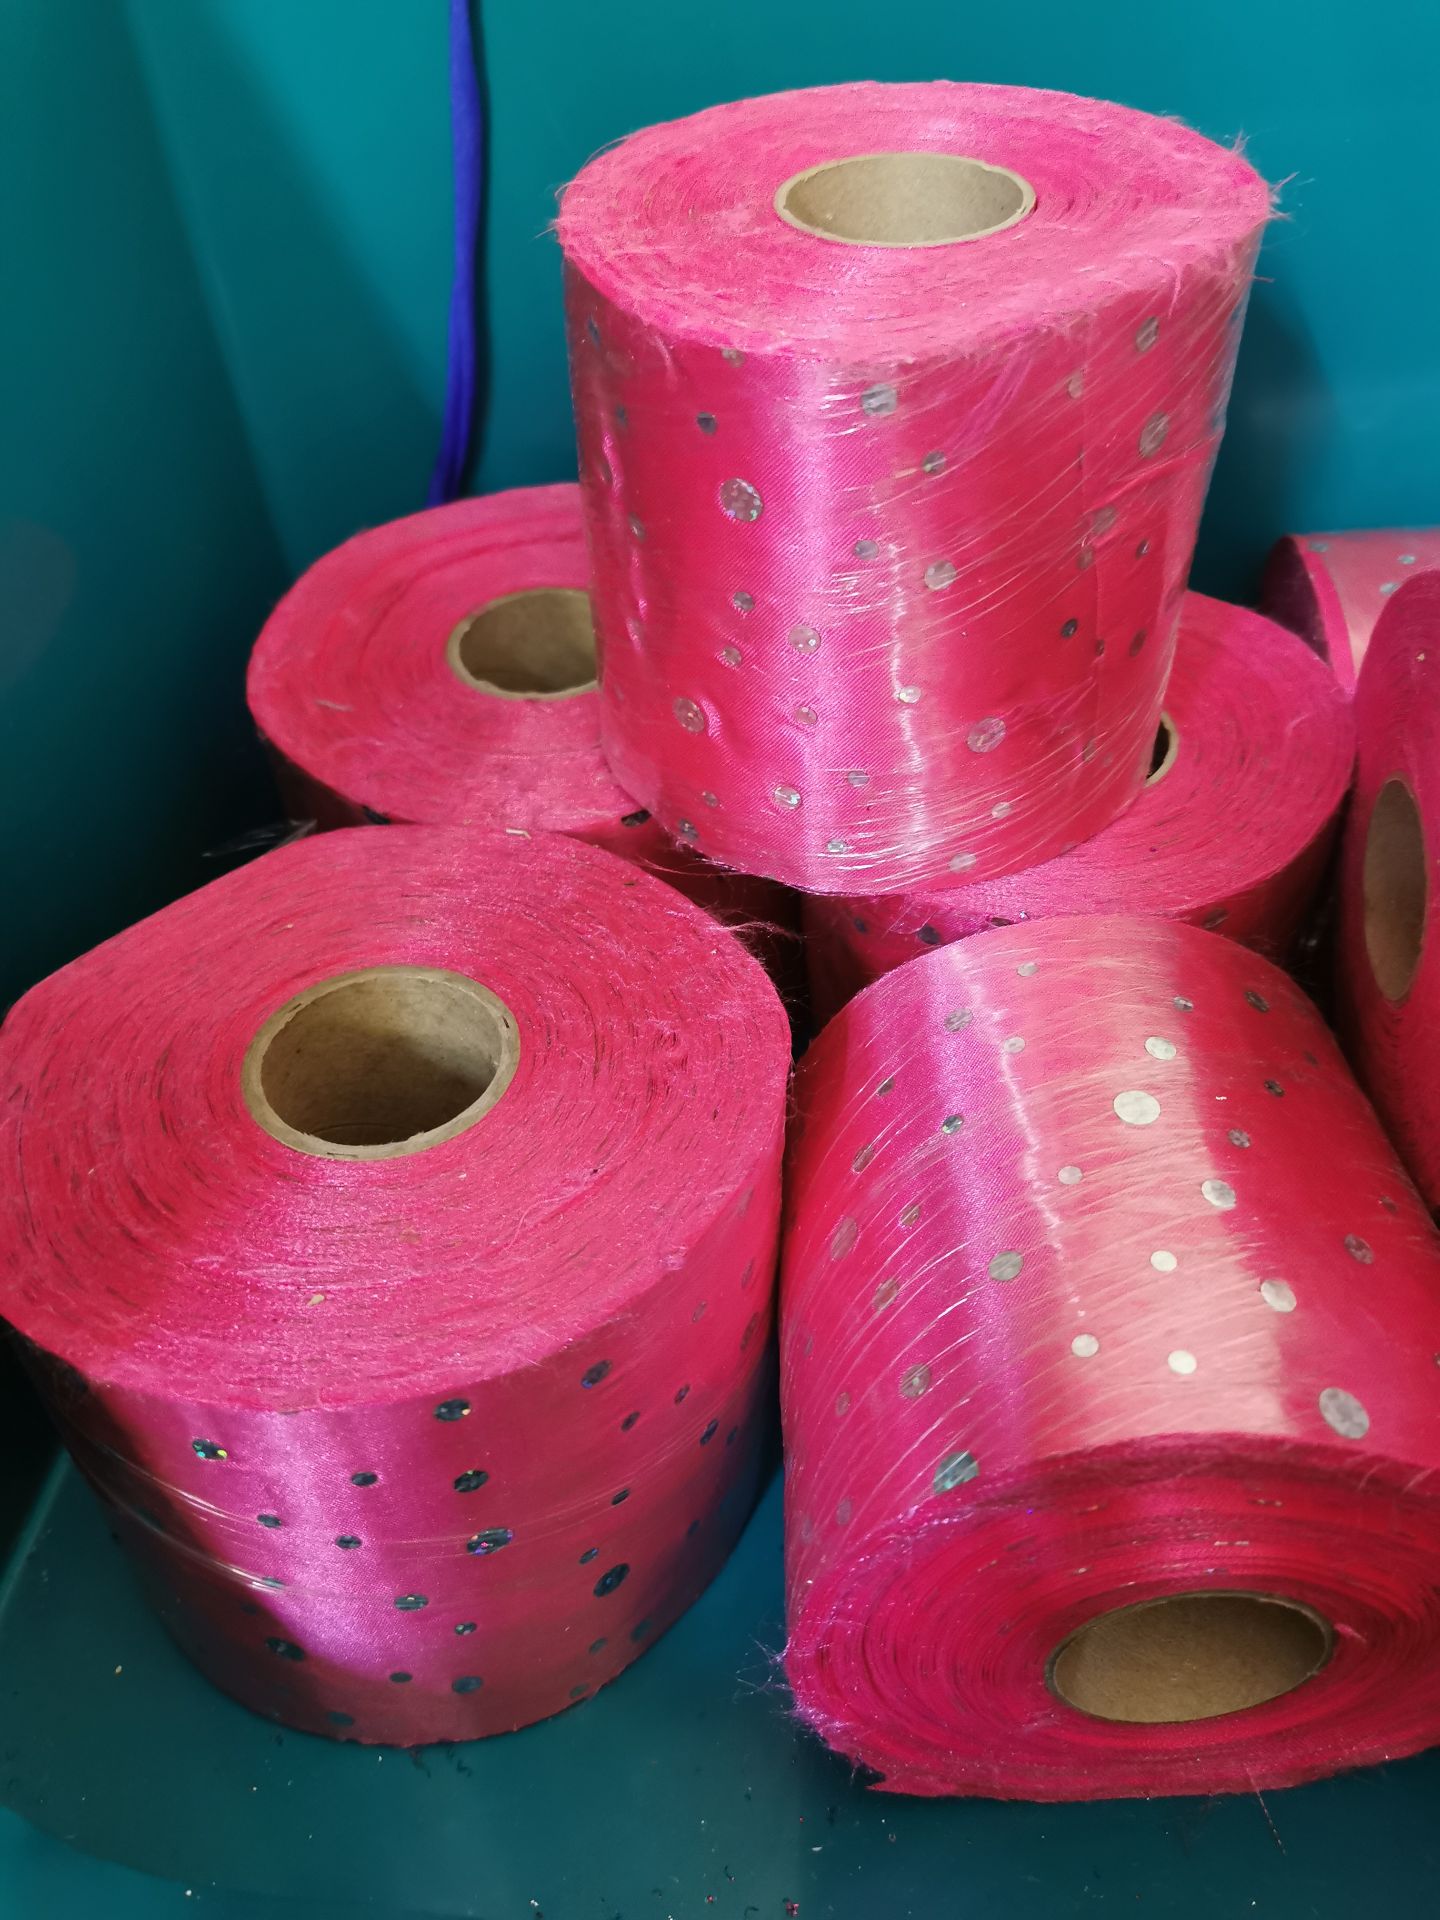 33x Sequin fabric rolls in pink and blue - Image 2 of 4